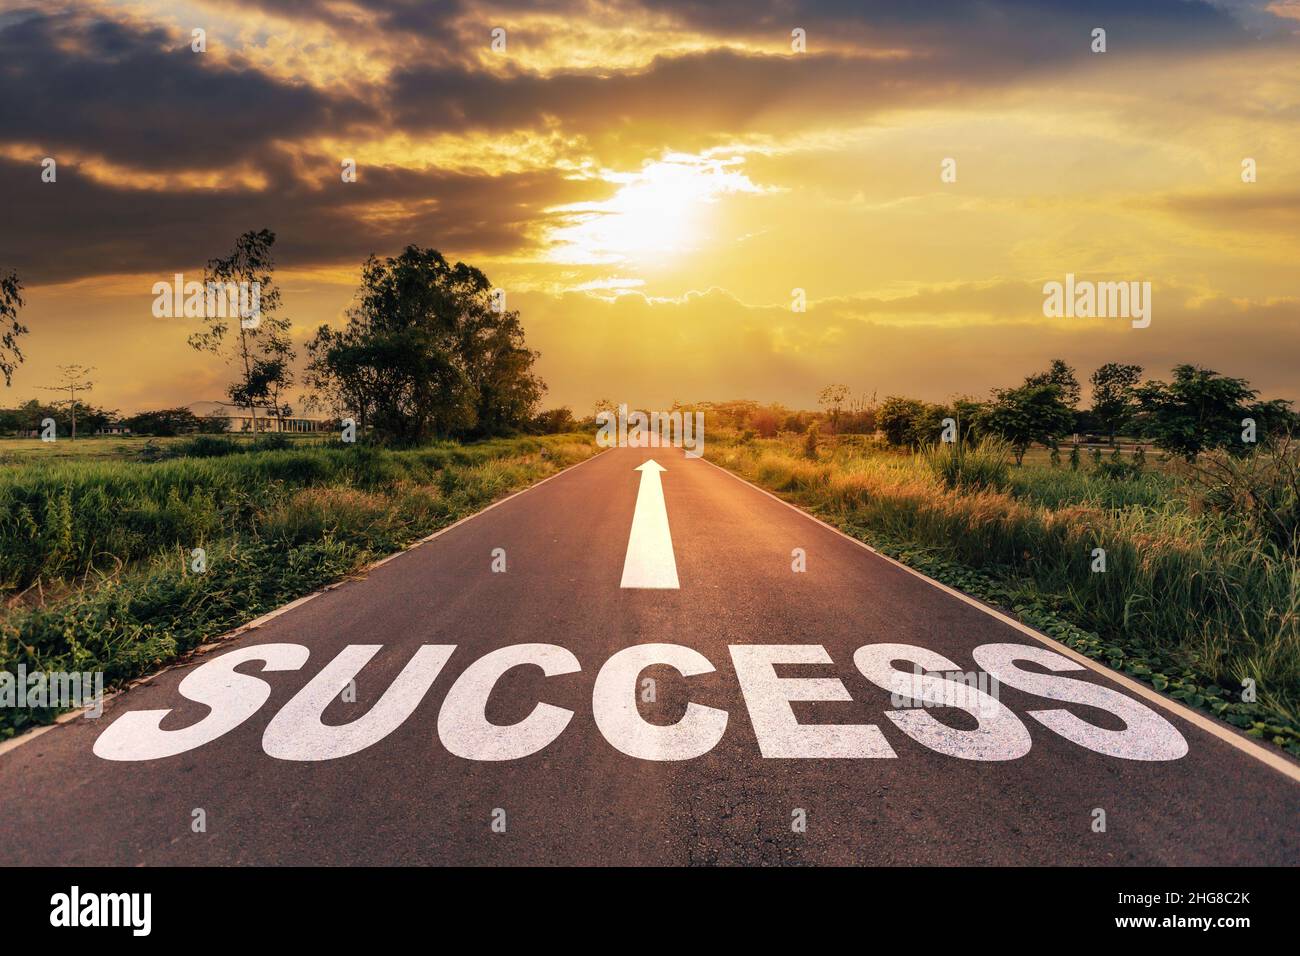 Success text on the highway road concept for planning and challenge or career path, business strategy in sunset background. Stock Photo